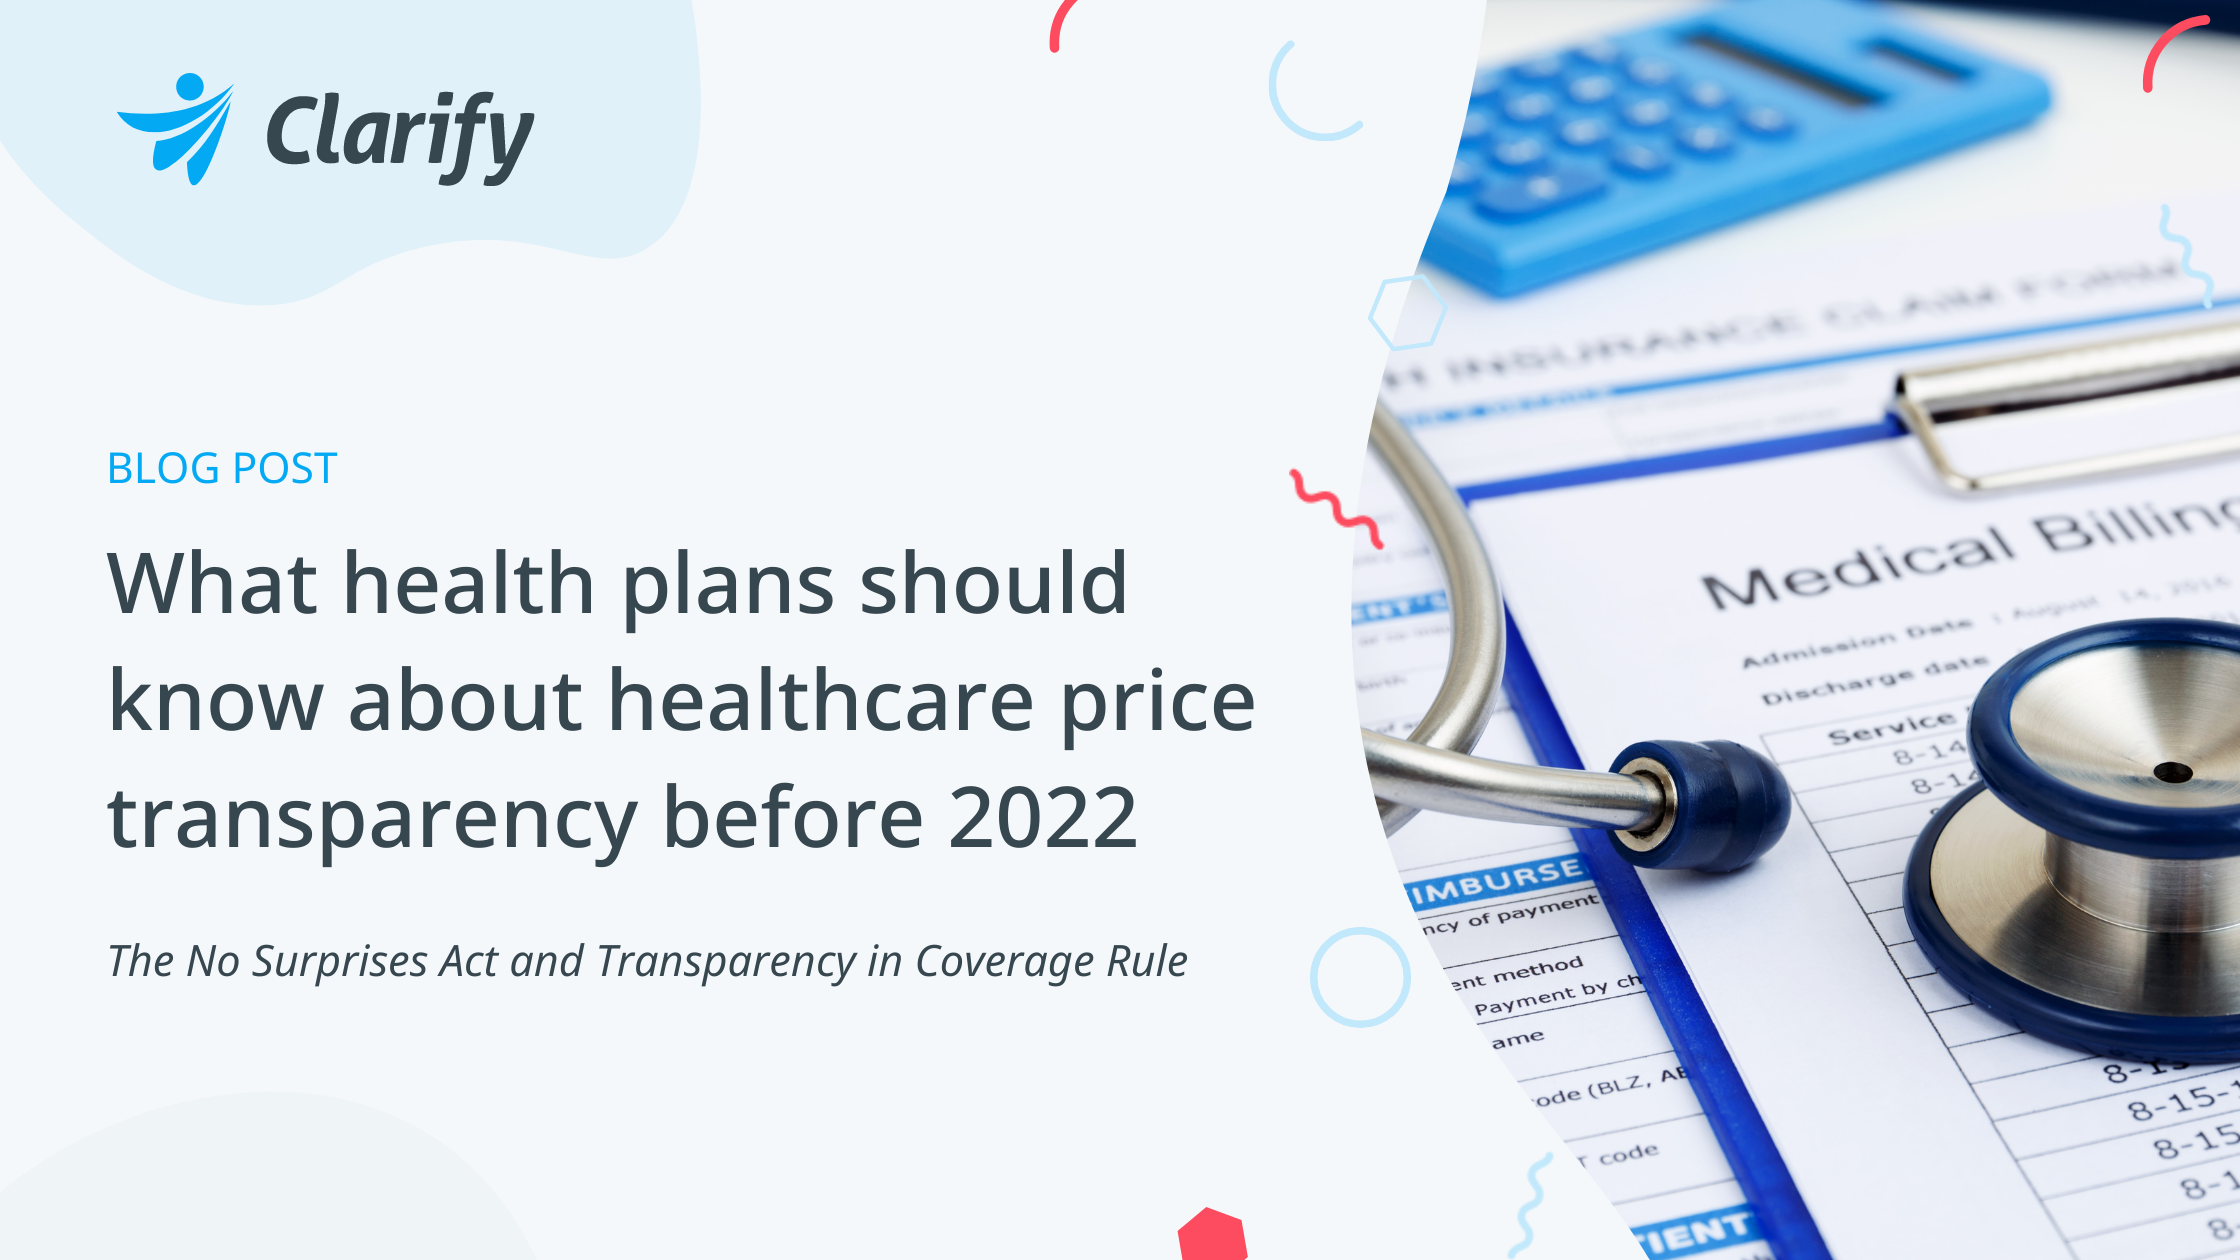 Clarify Health blog - The No Surprises Act and Transparency in Coverage Rule